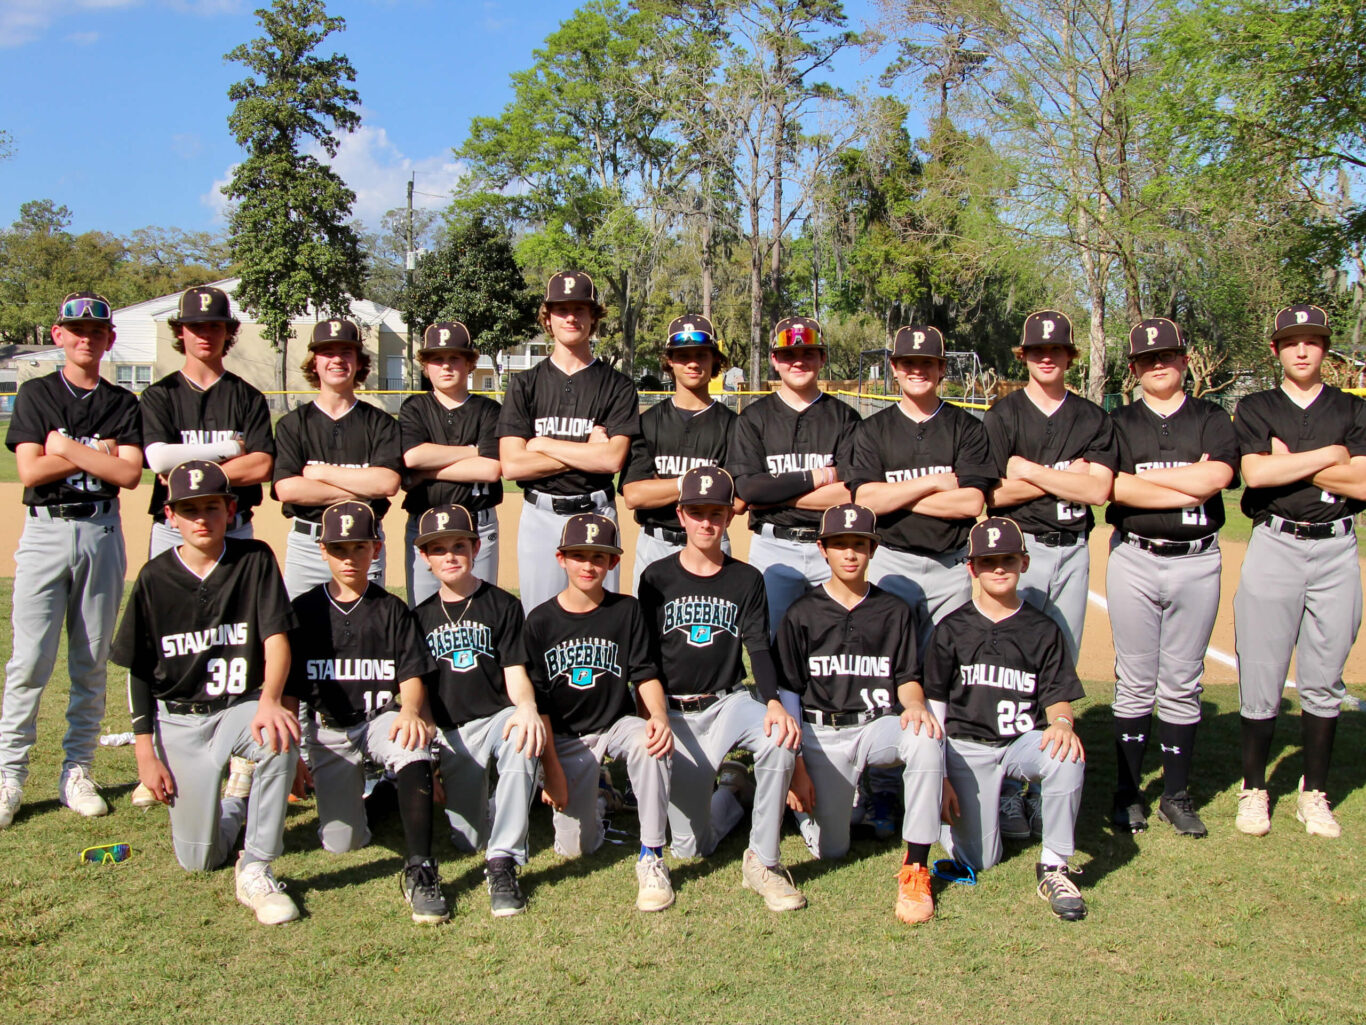 A baseball team is posing for a picture.